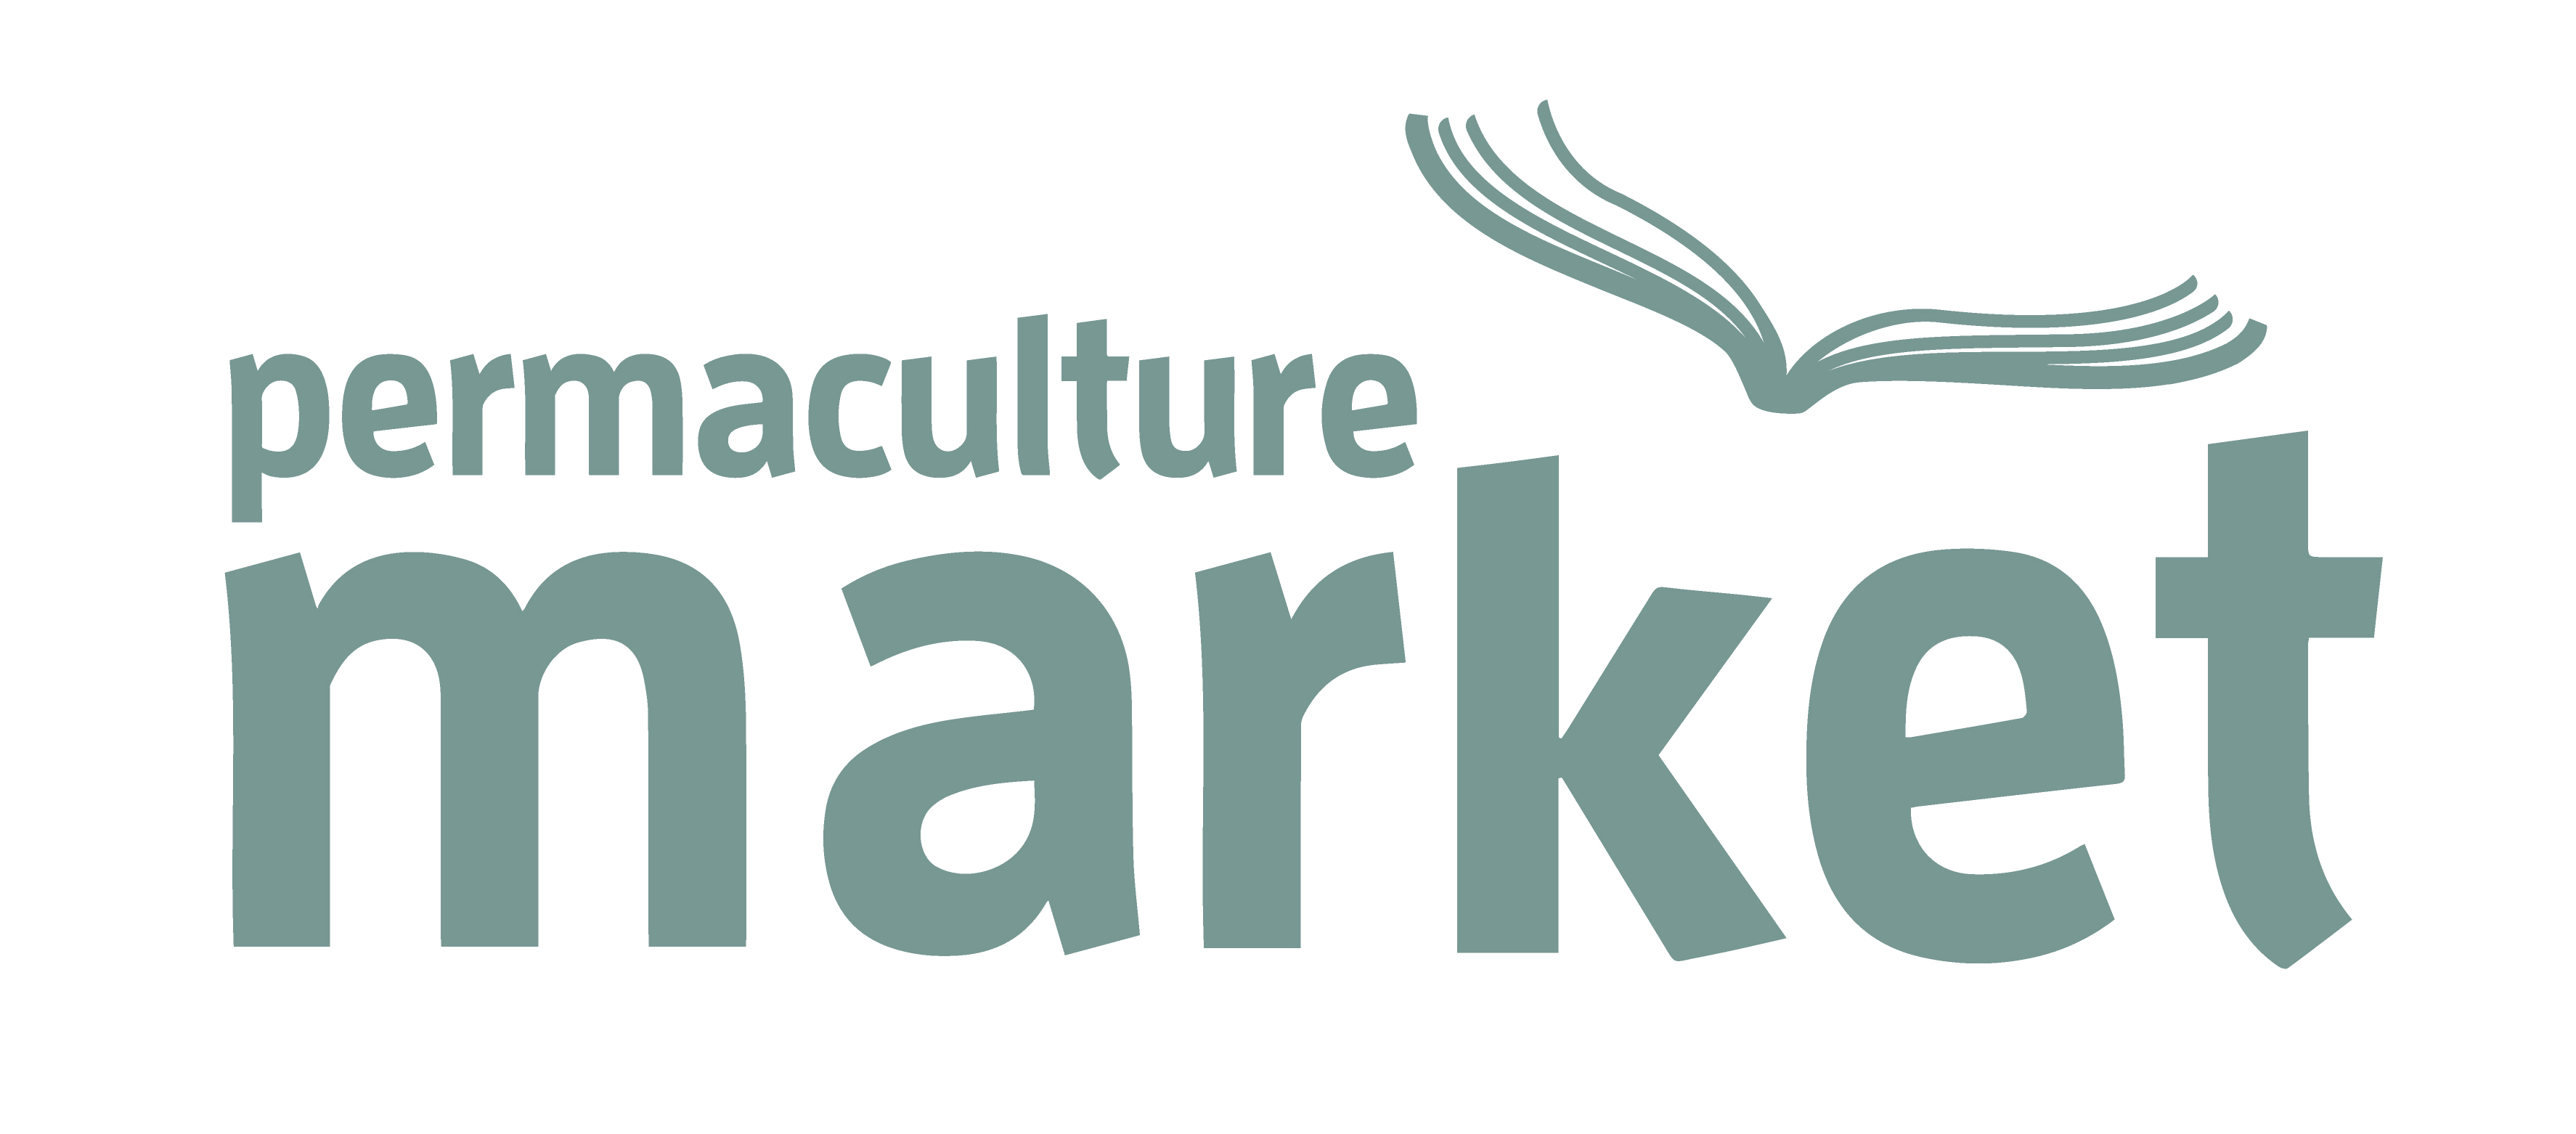 Permaculture market